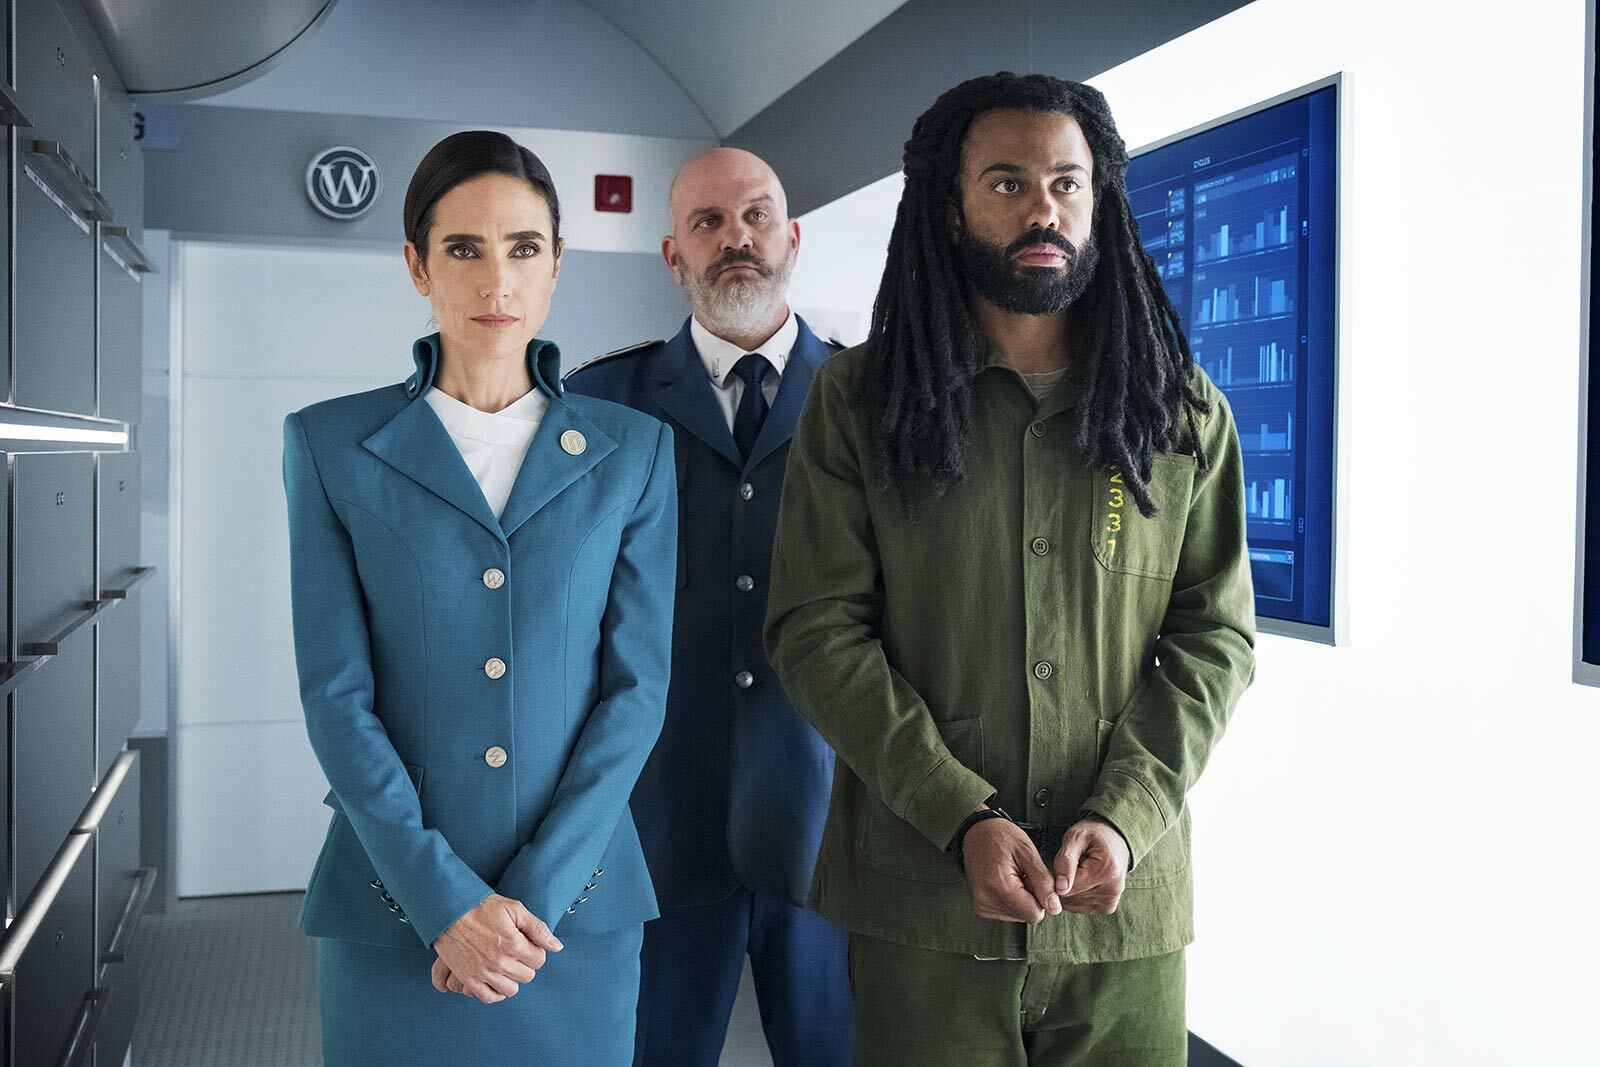 Daveed Diggs in handcuffs alongside Jennifer Connelly and Mike O'Malley